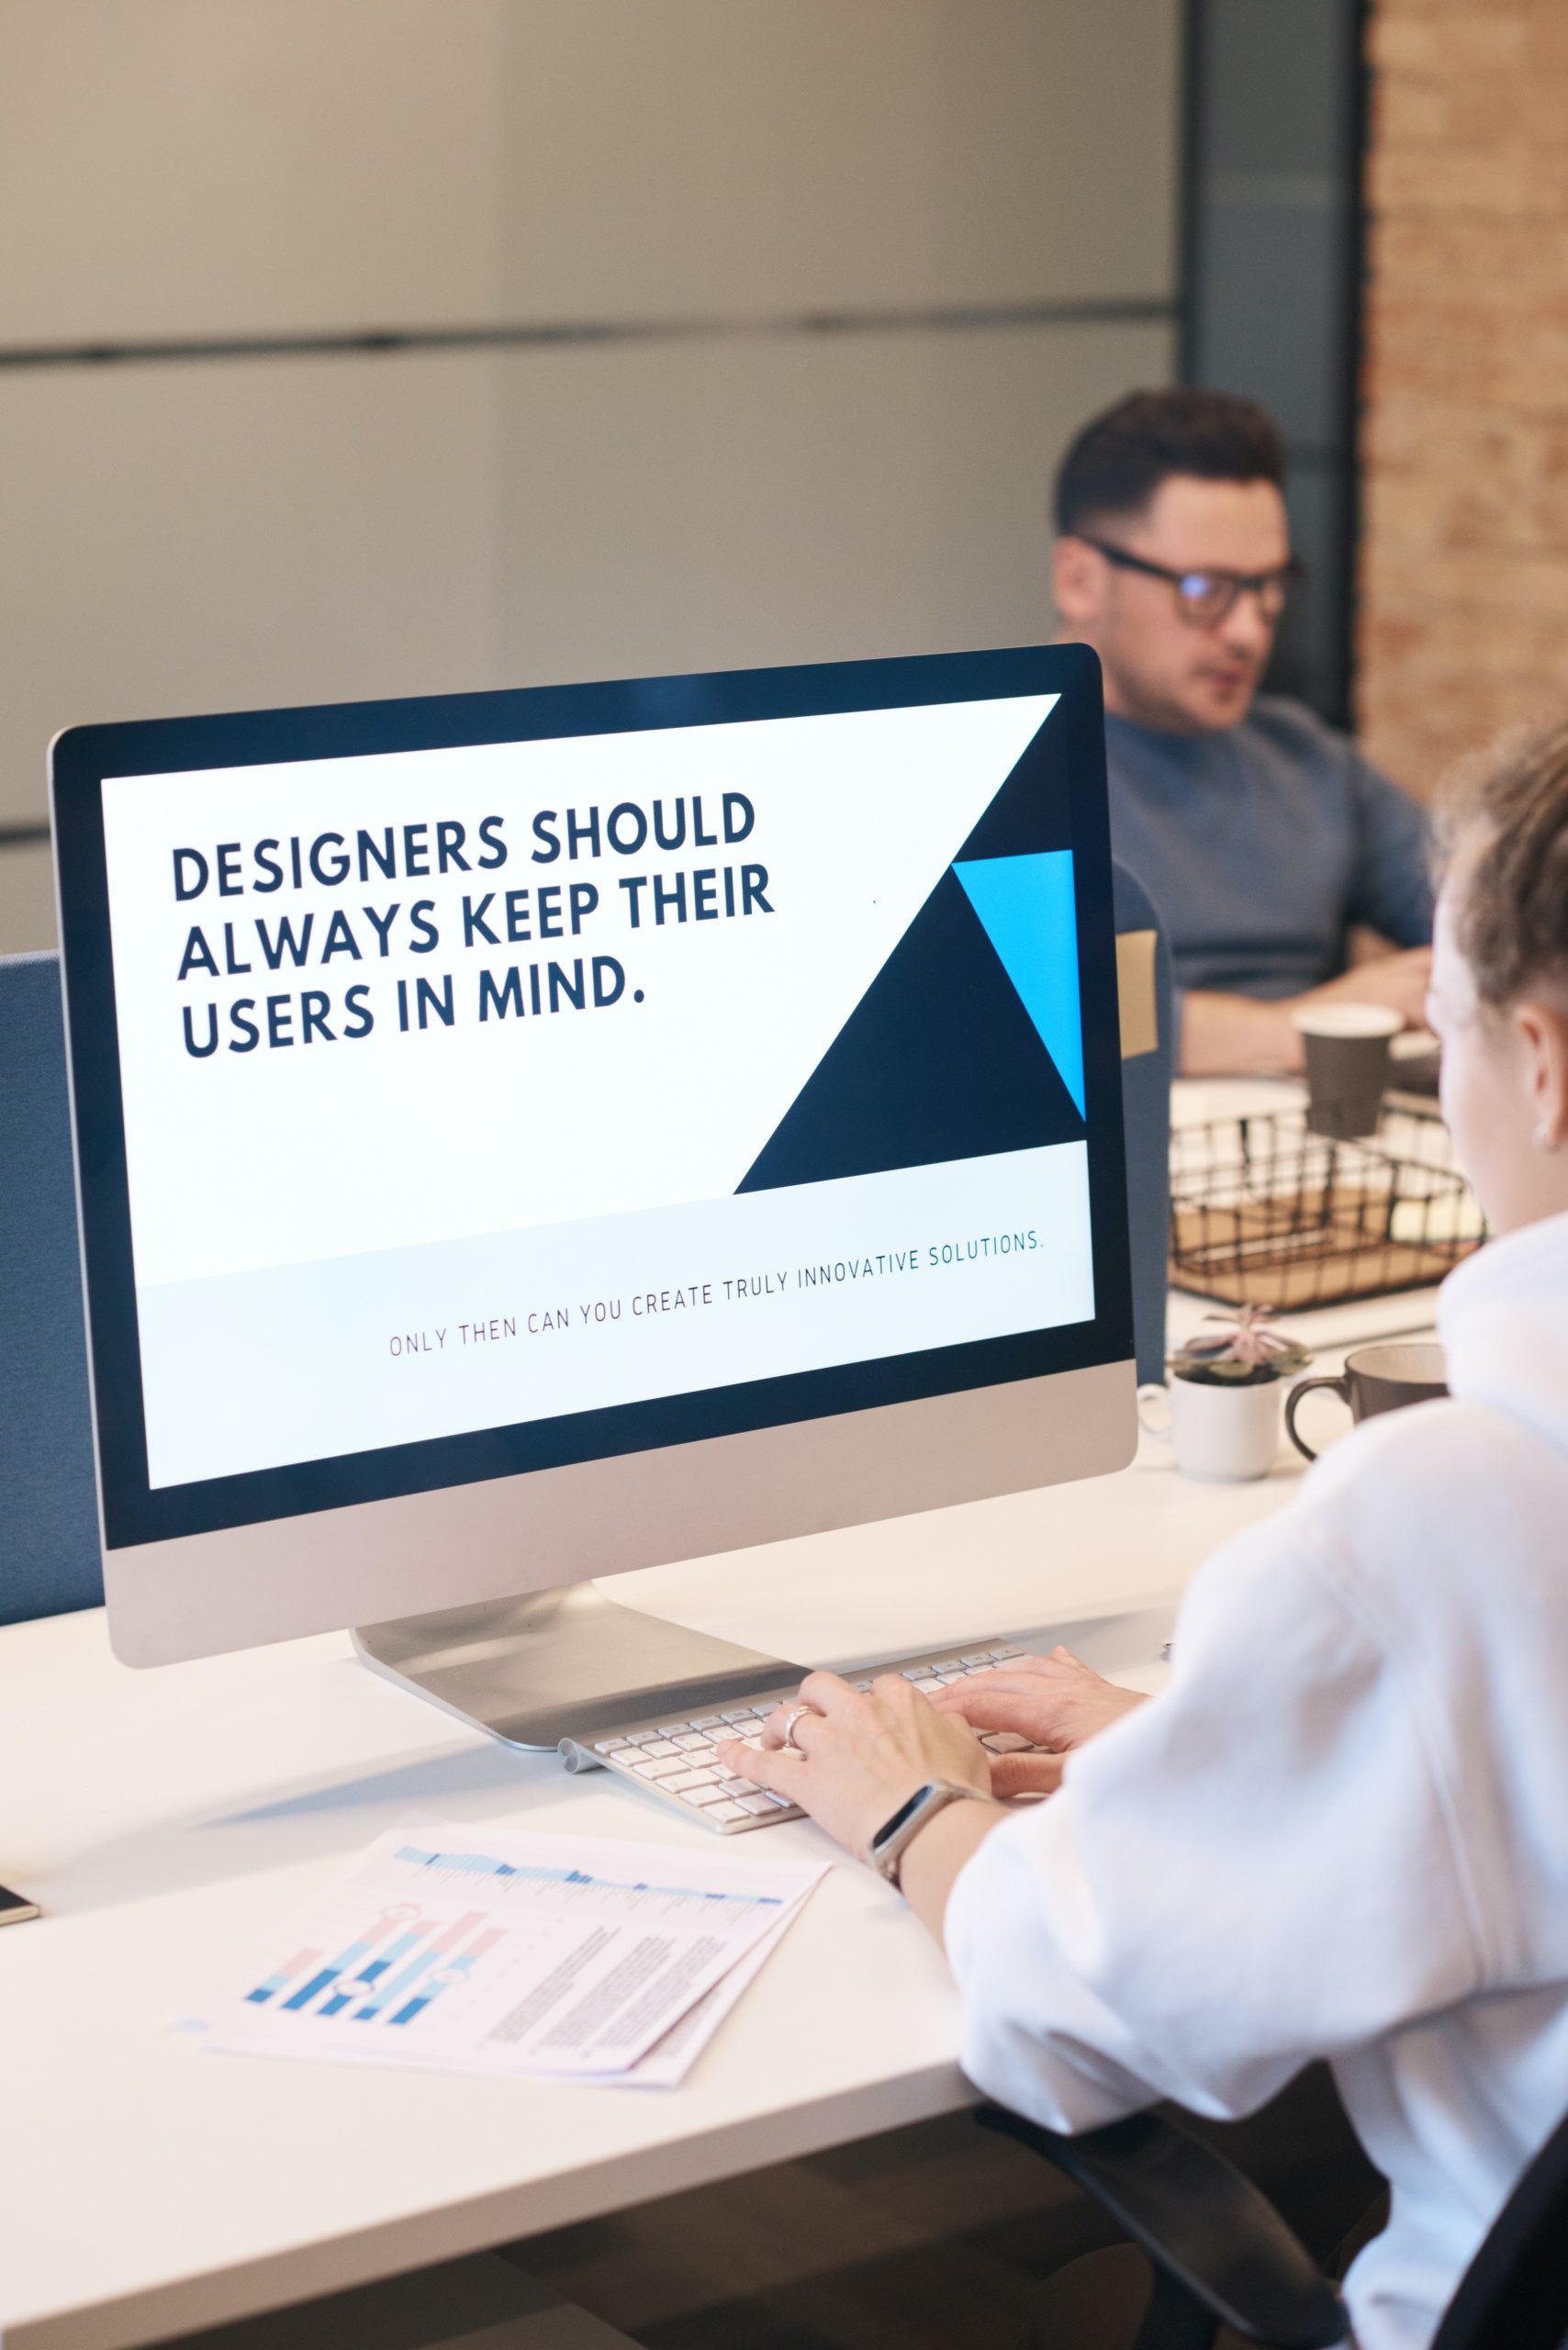 Blog about ux and ui design: the picture shows a monitor on a desk in an office. on the monitor it says: designers should always keep their users in mind. 